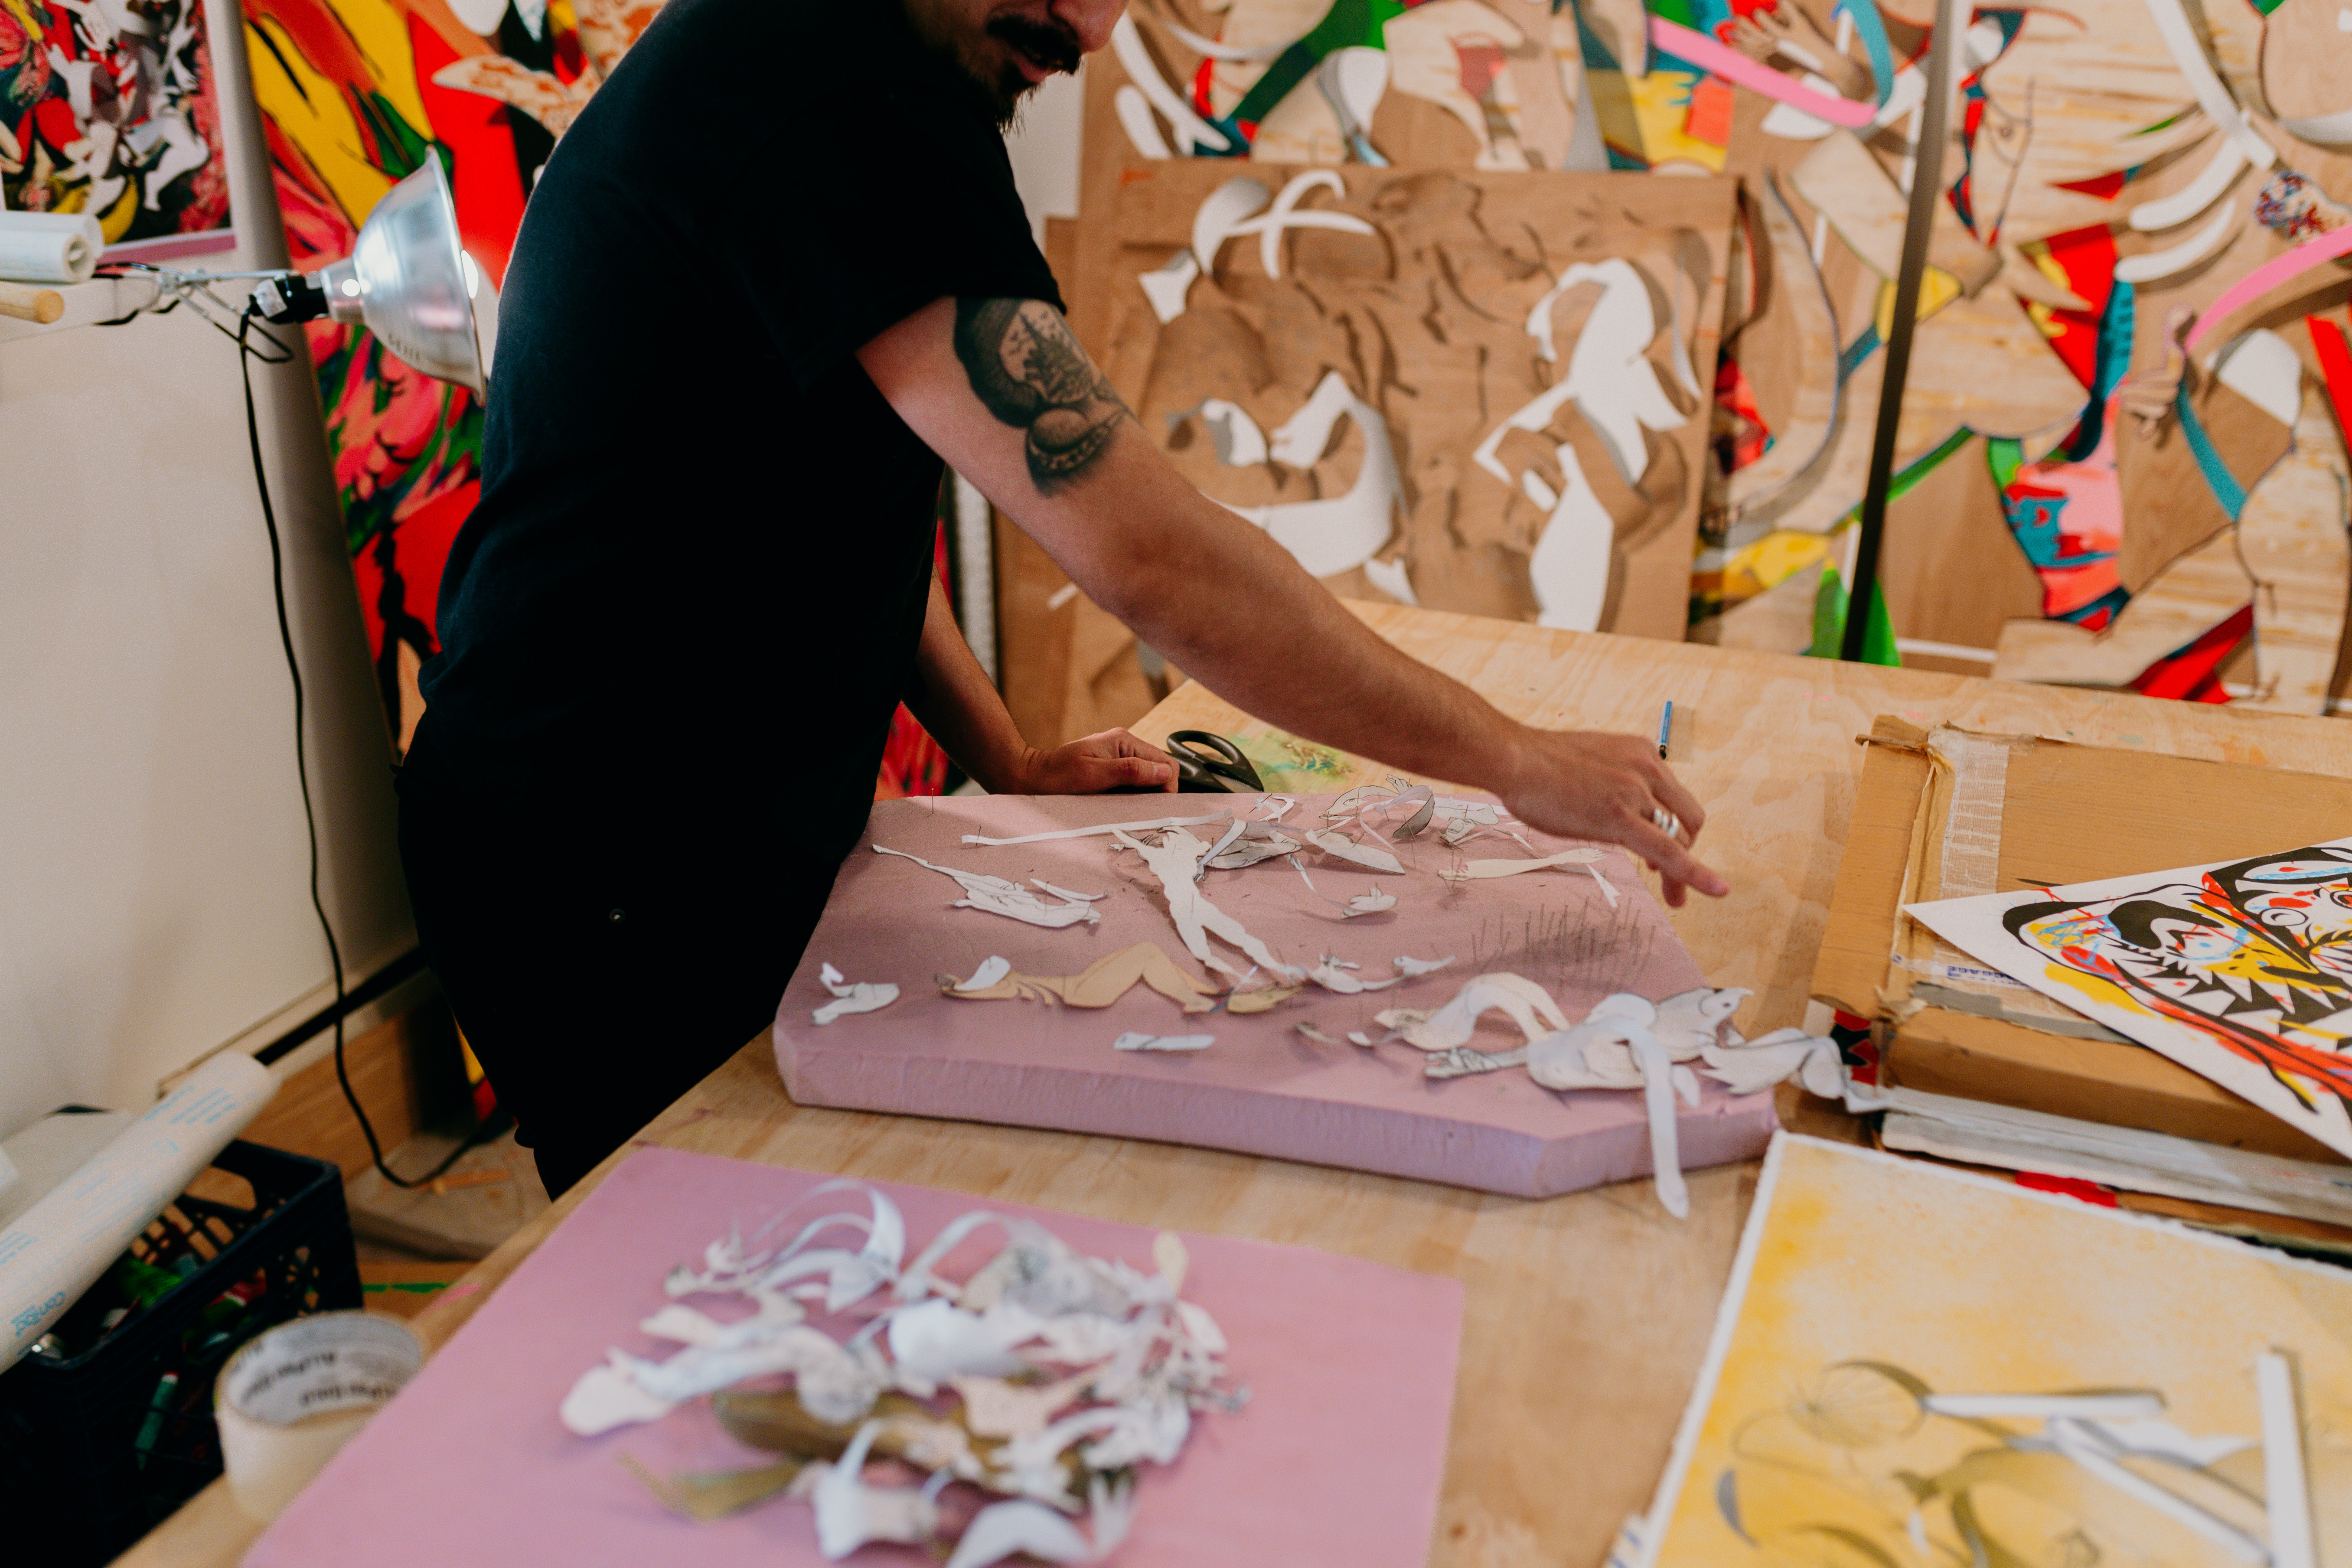 Candid shot of a man working in a studio surrounded by wood panel artworks and styrofoam .